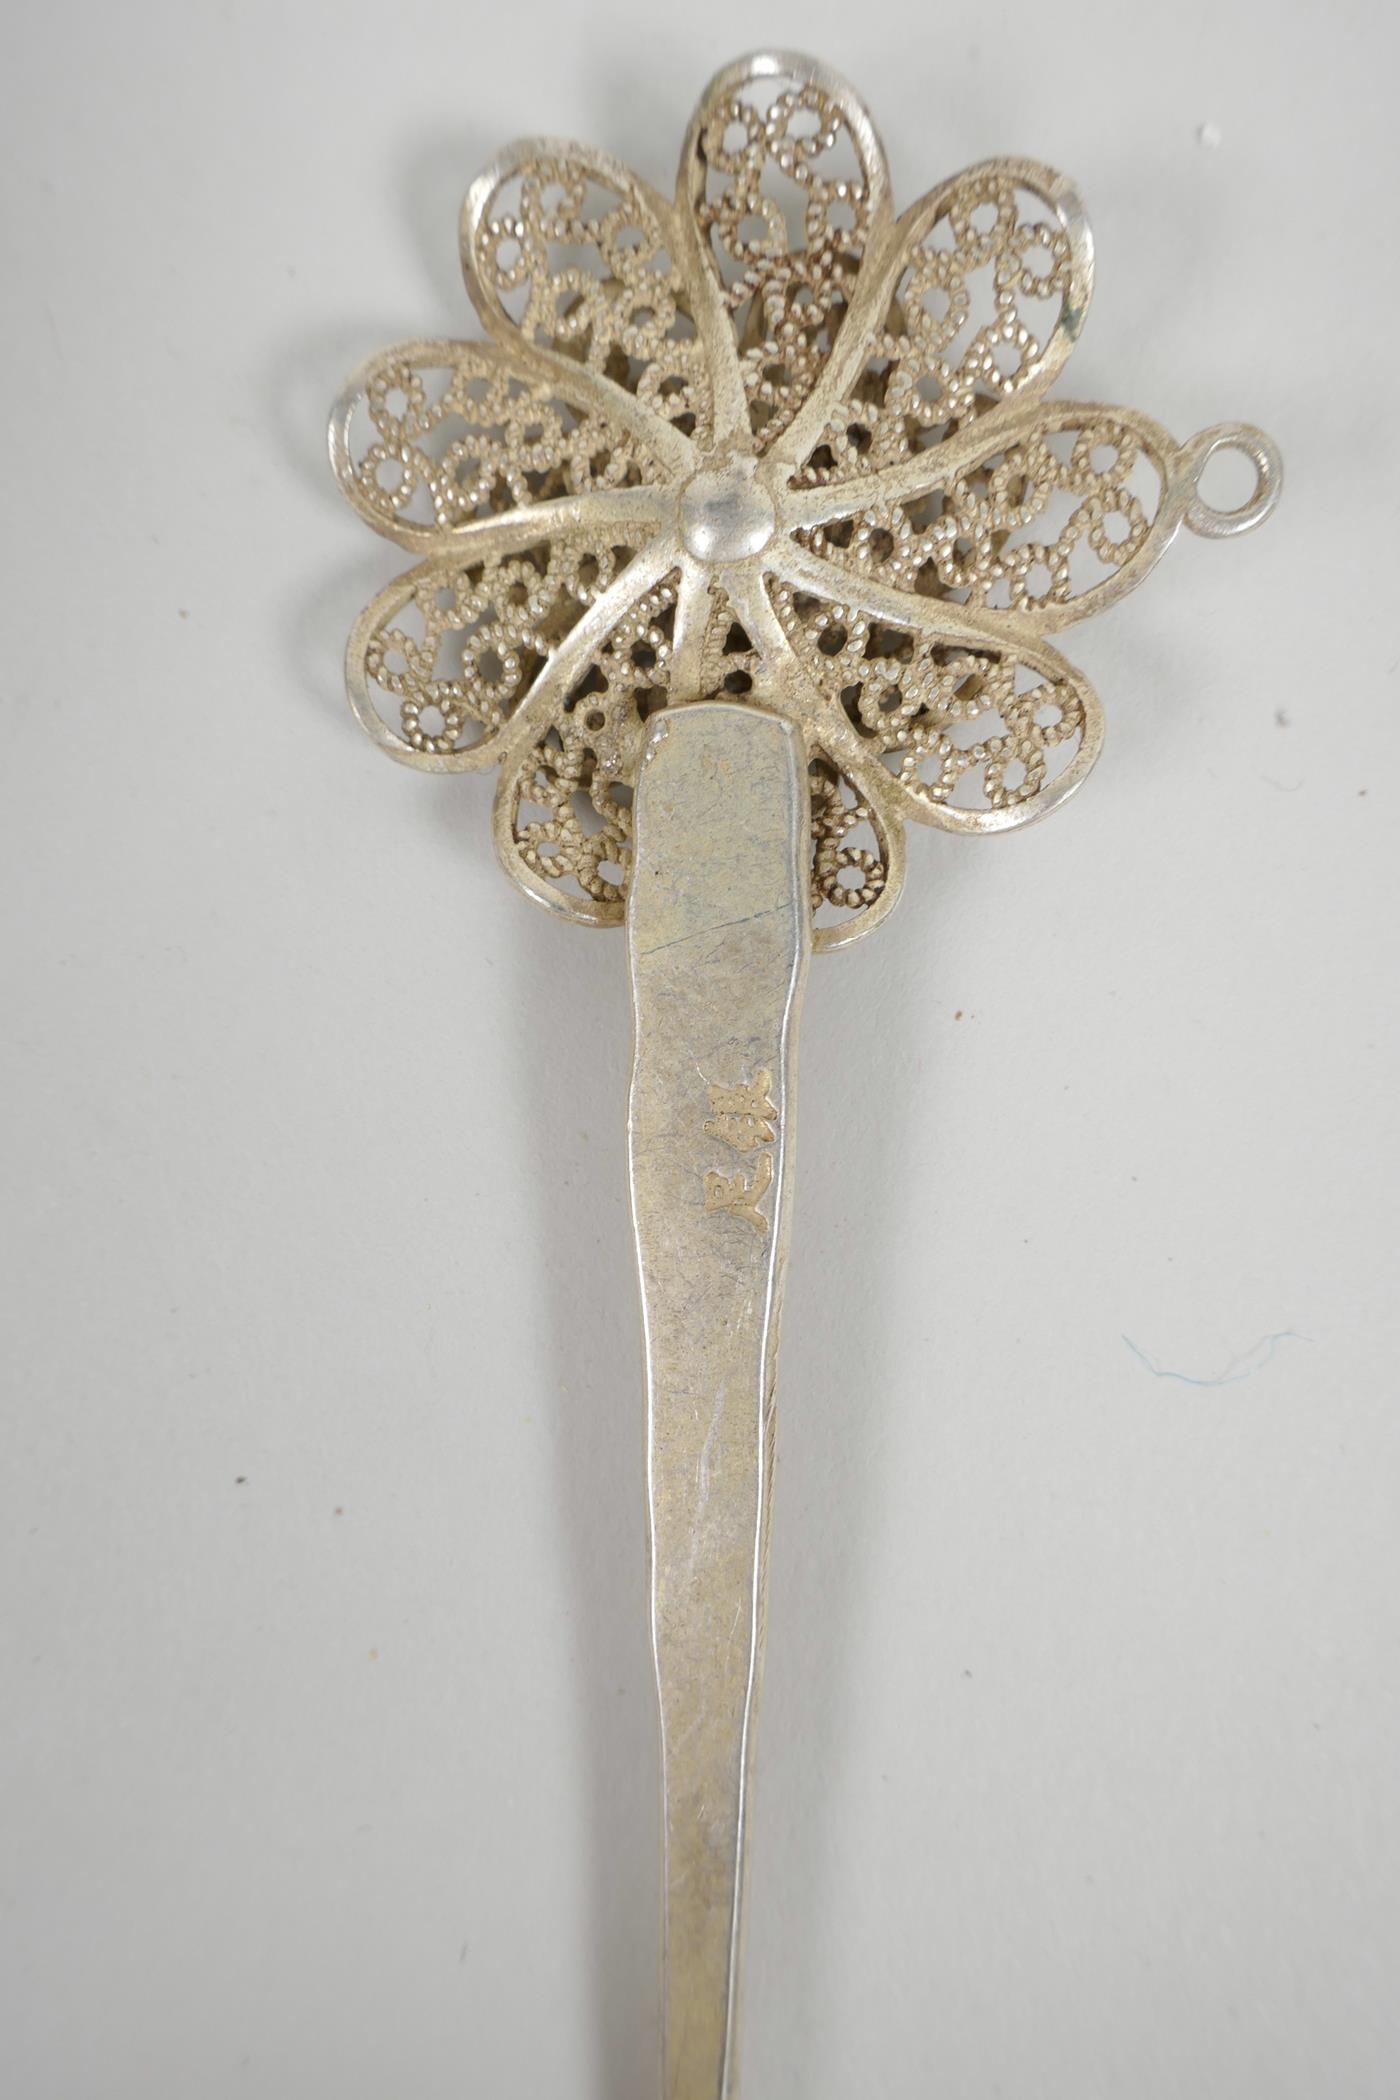 Three Chinese silvered metal hairpins with floral and peacock decoration, impressed character marks, - Image 5 of 7